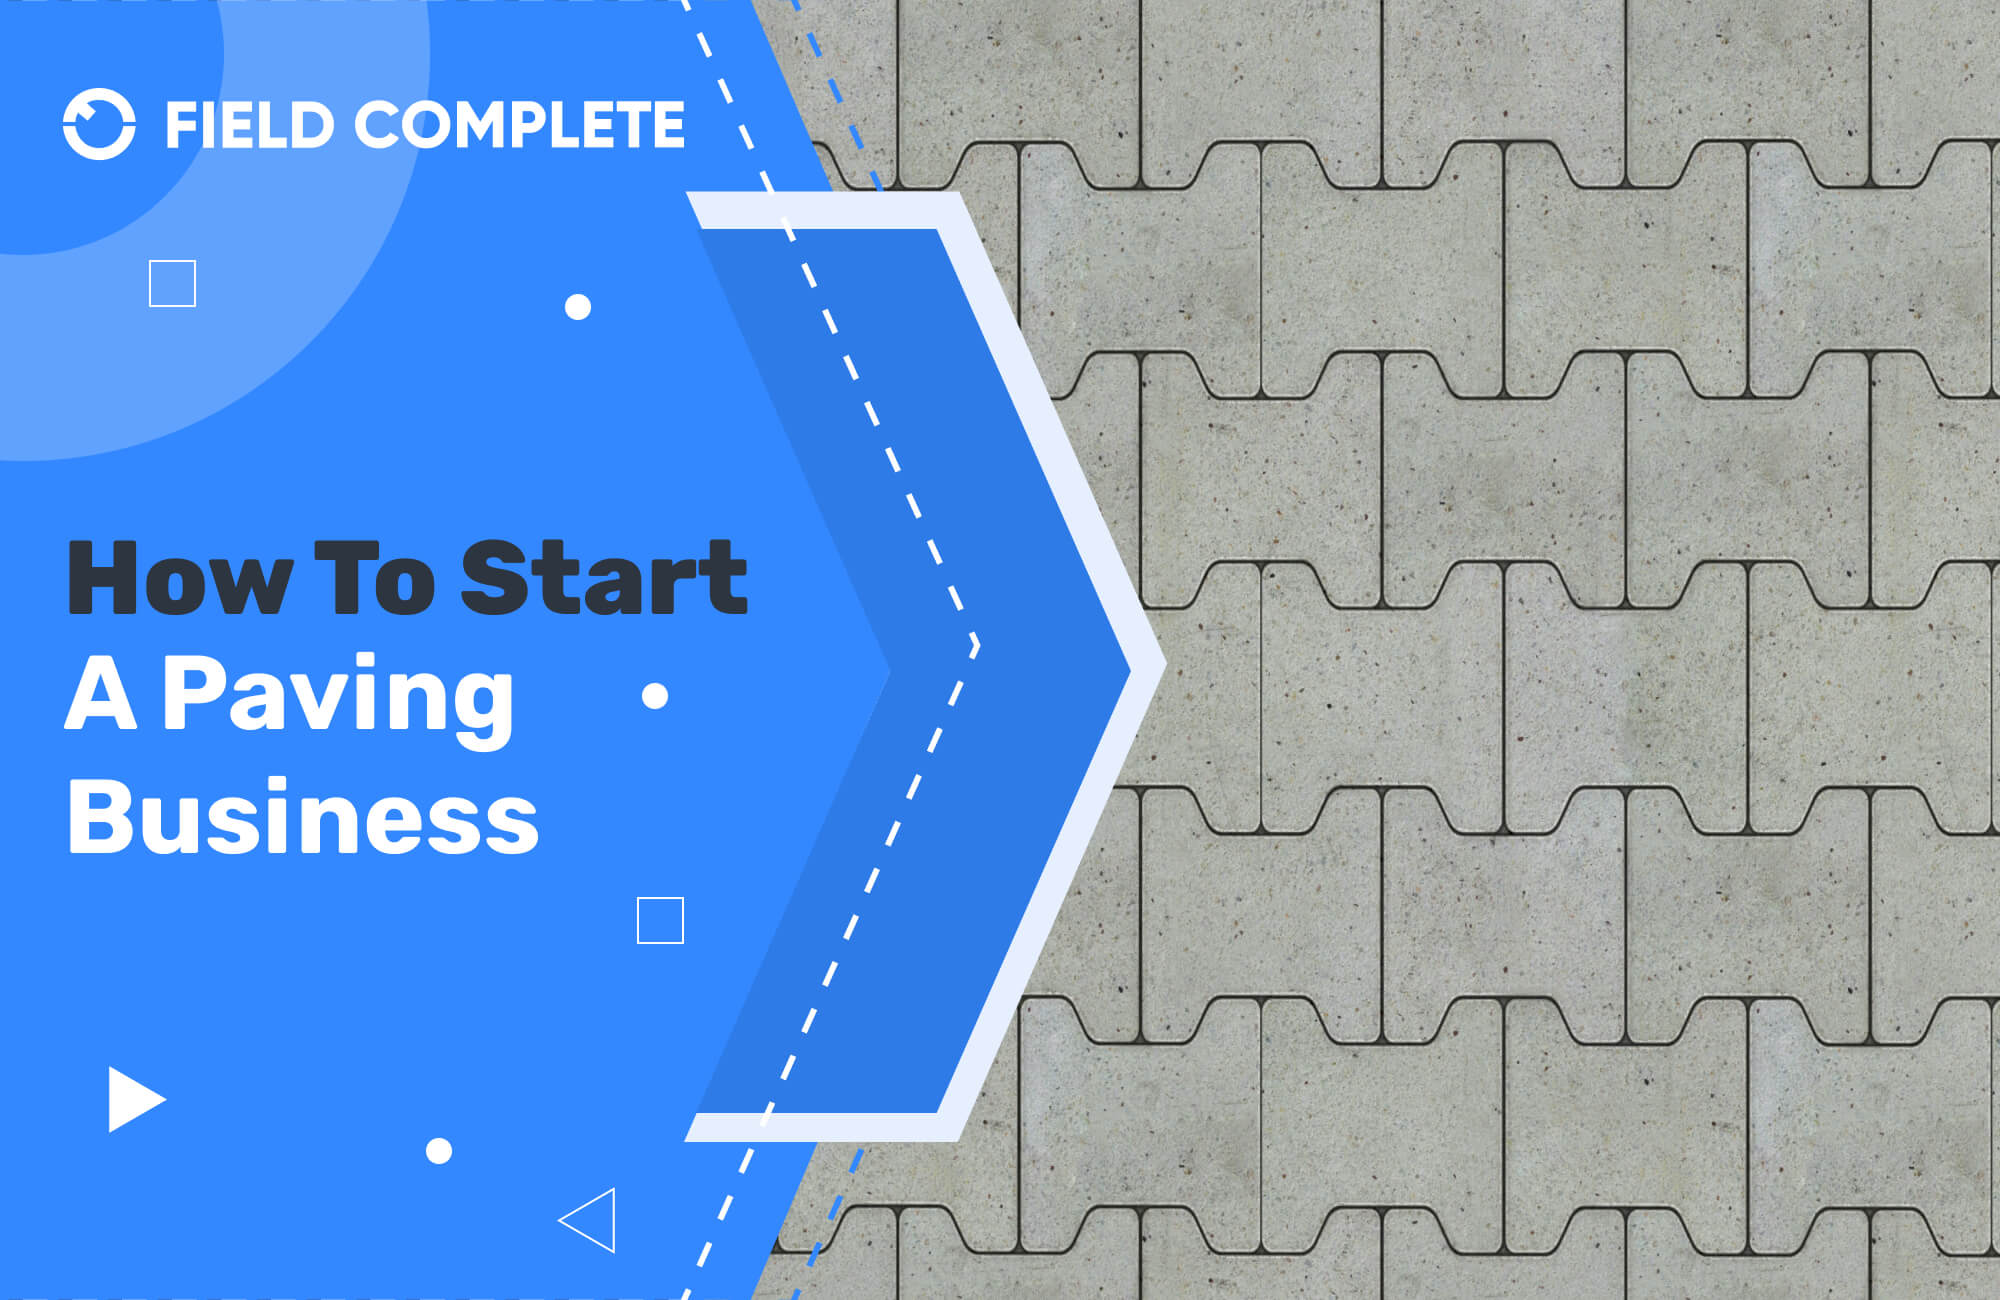 How To Start A Paving Business